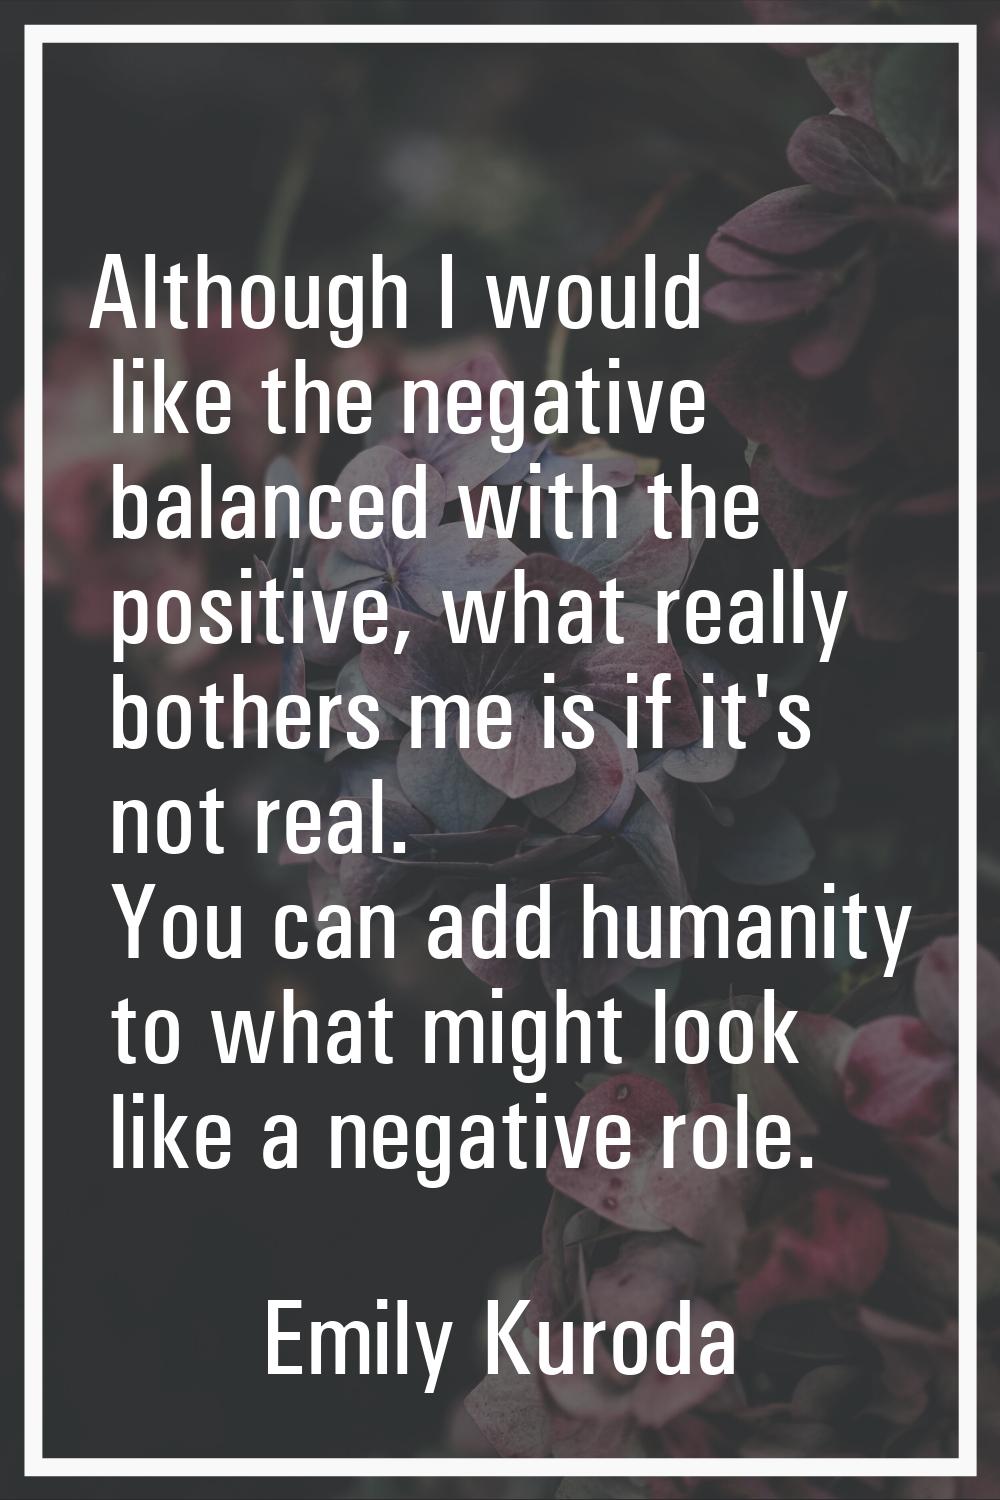 Although I would like the negative balanced with the positive, what really bothers me is if it's no